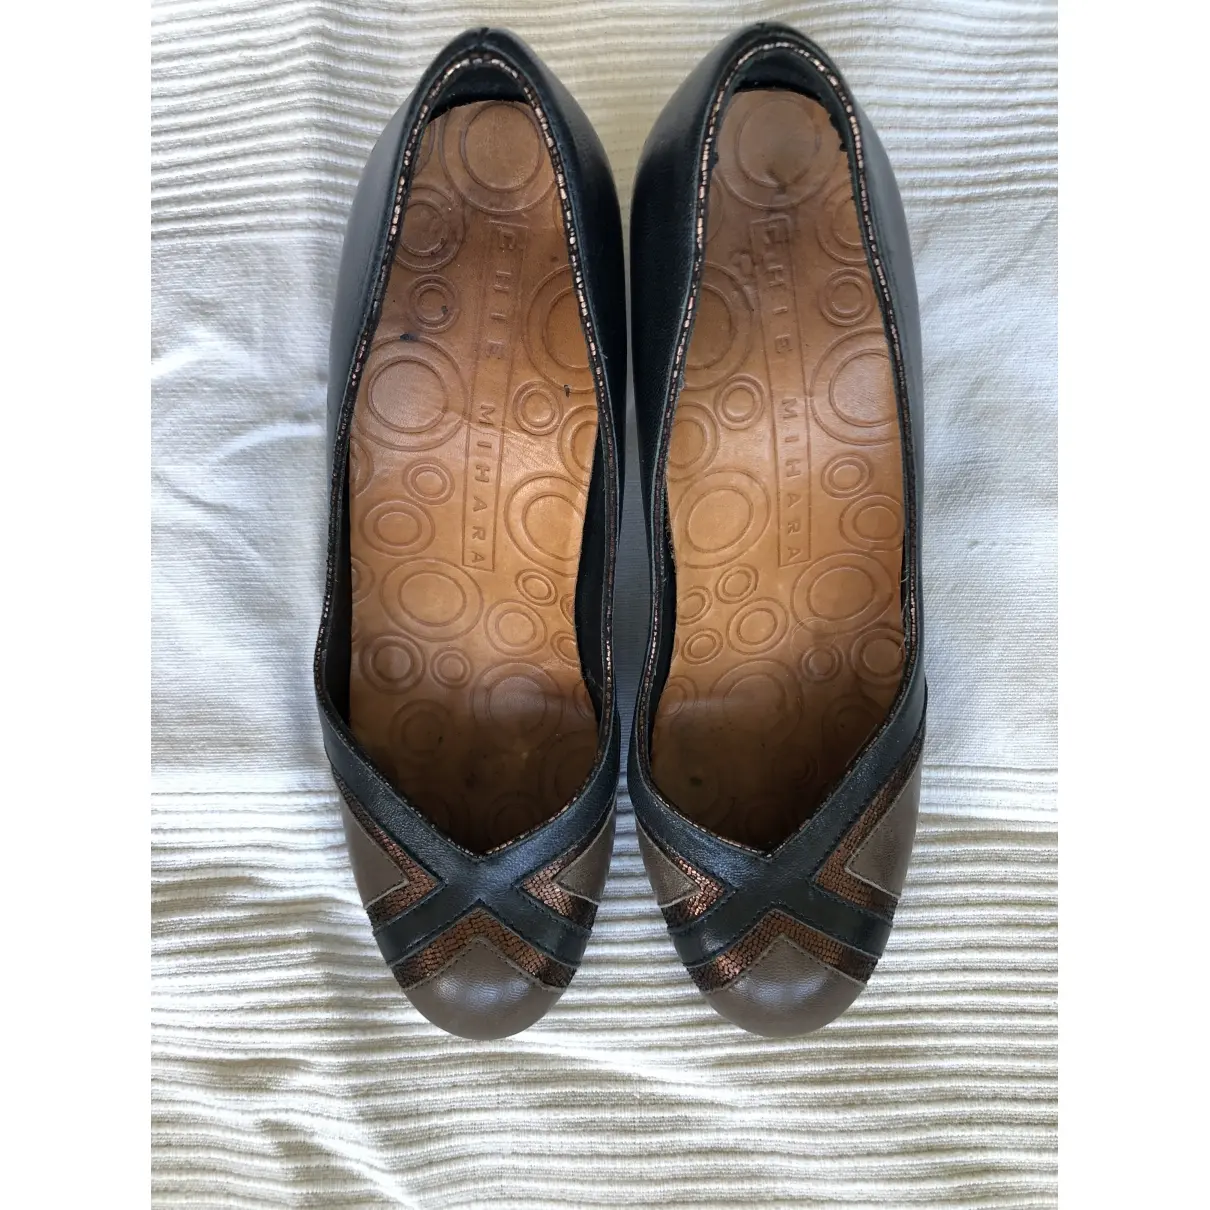 Chie Mihara Leather heels for sale